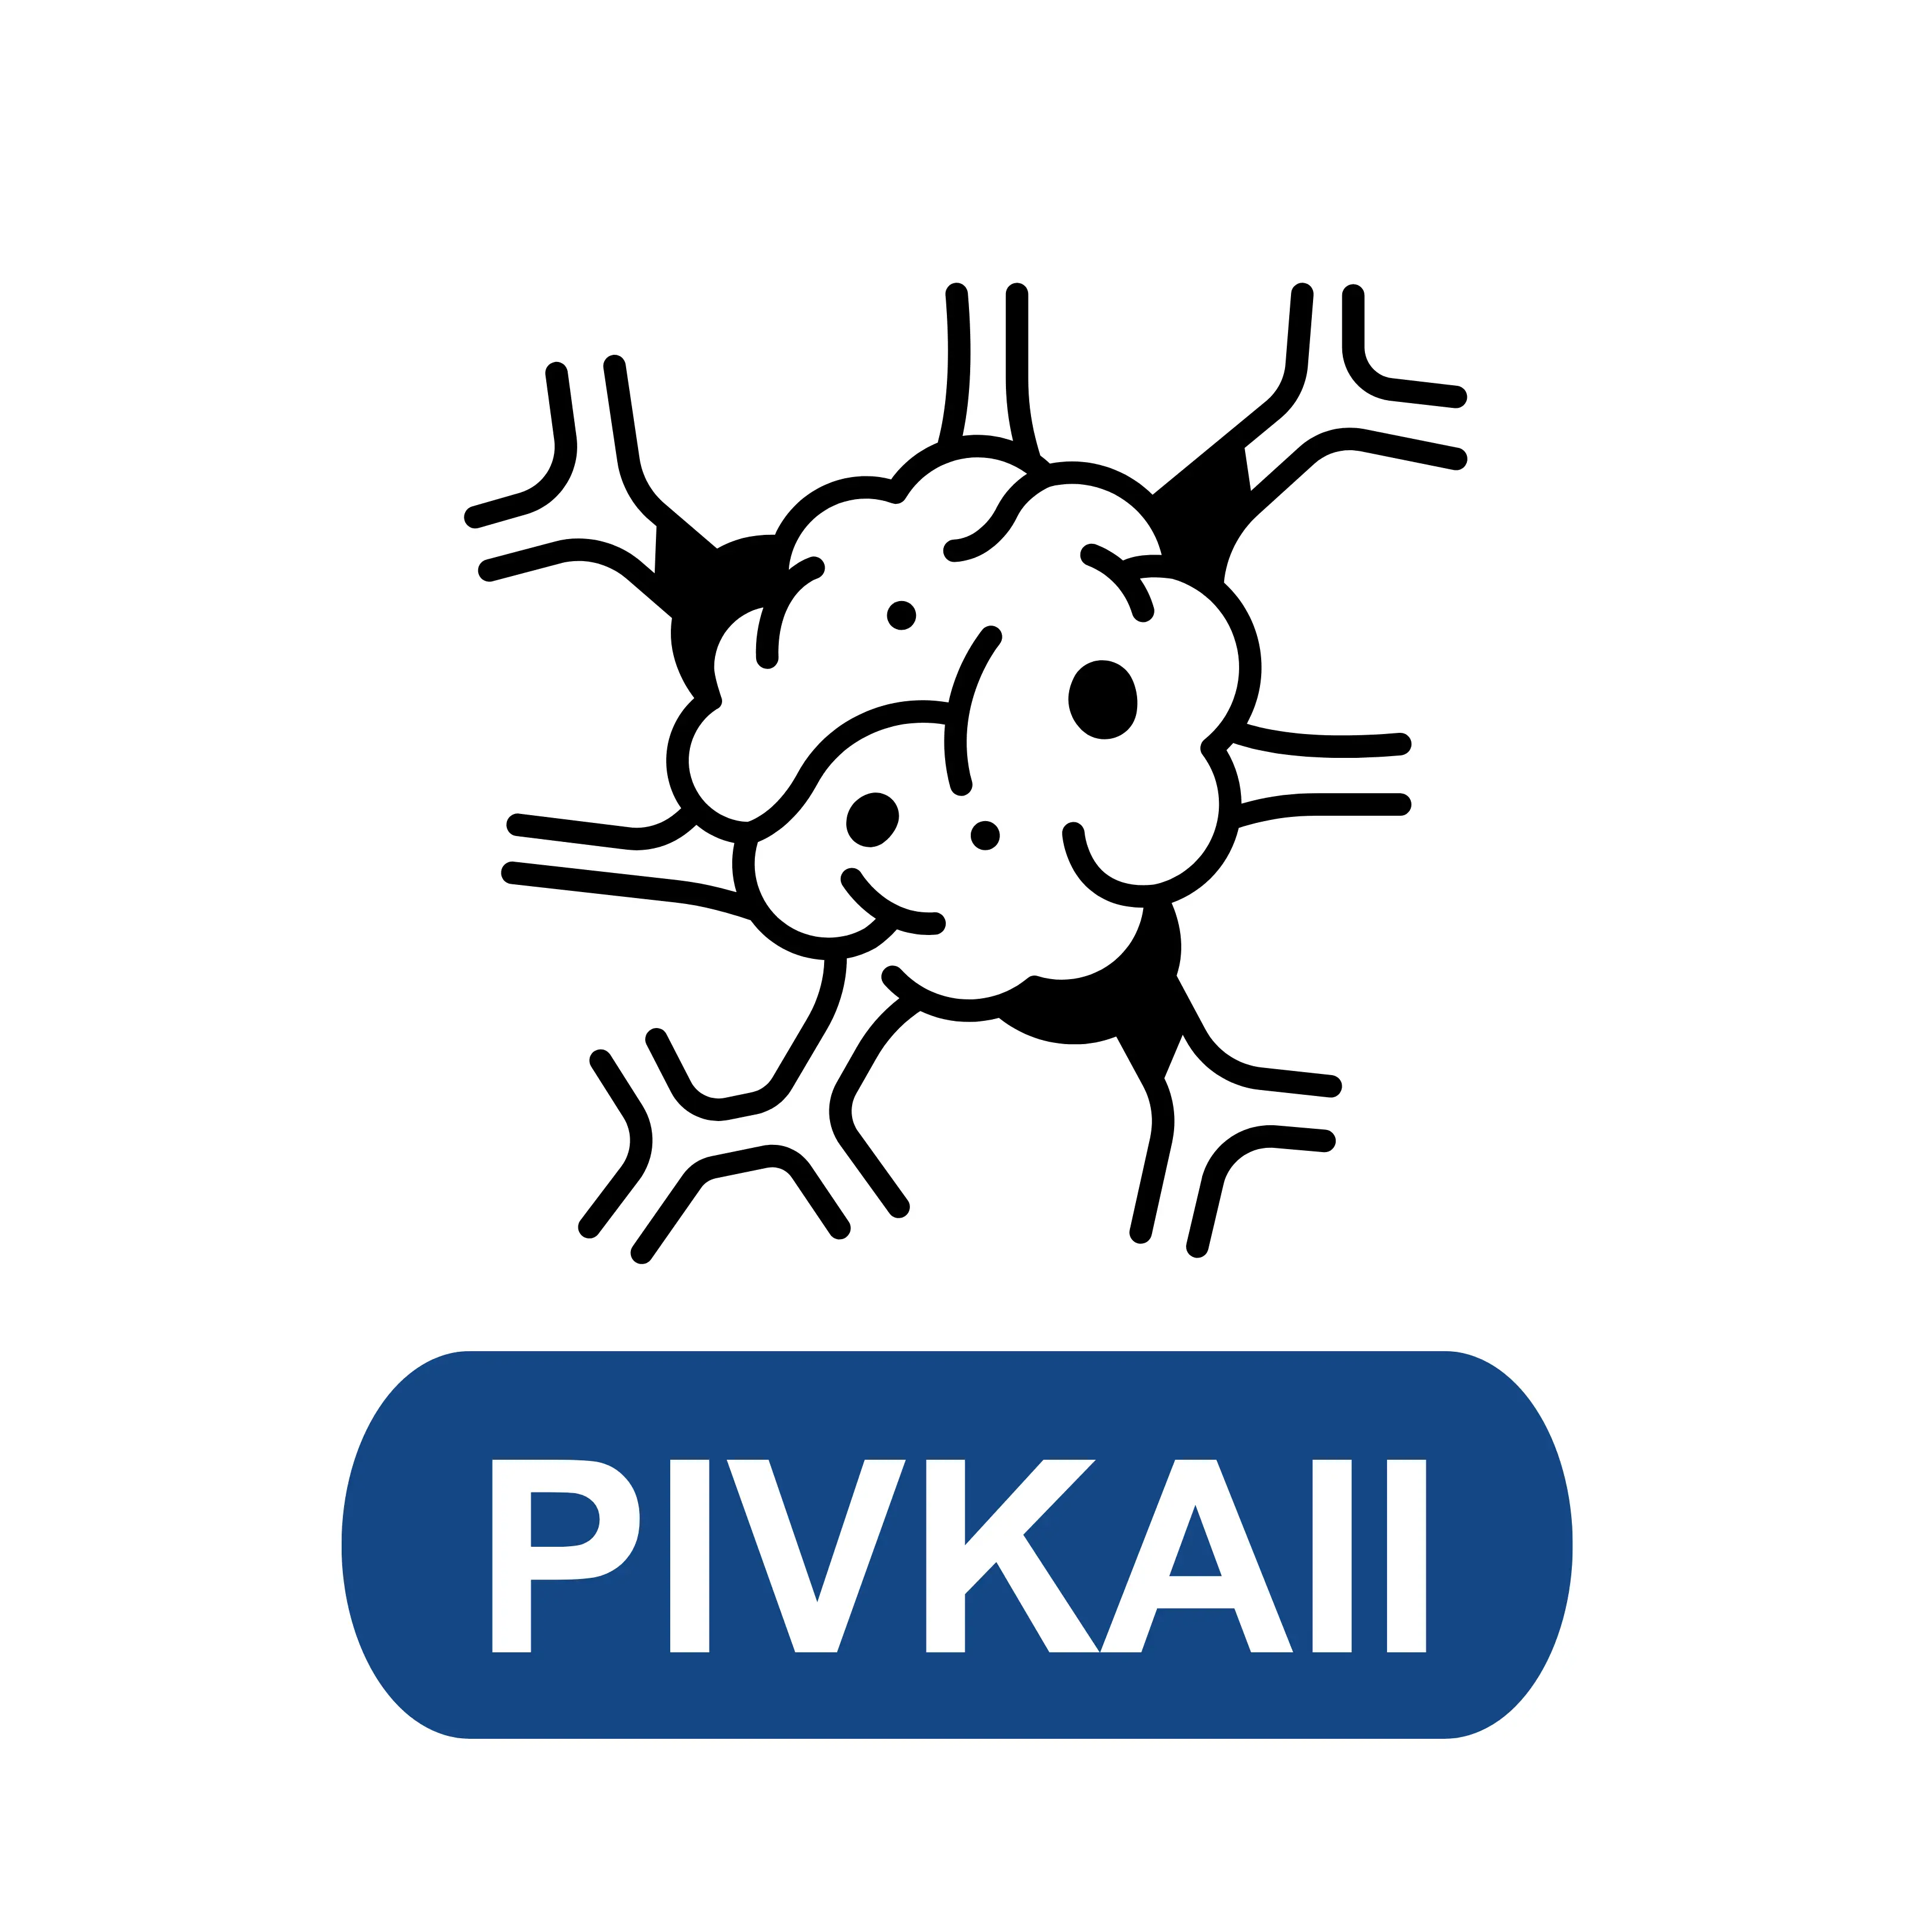 Protein Induced by Vitamin K Absence or Antagonist-II (PIVKA II Tumor Marker)